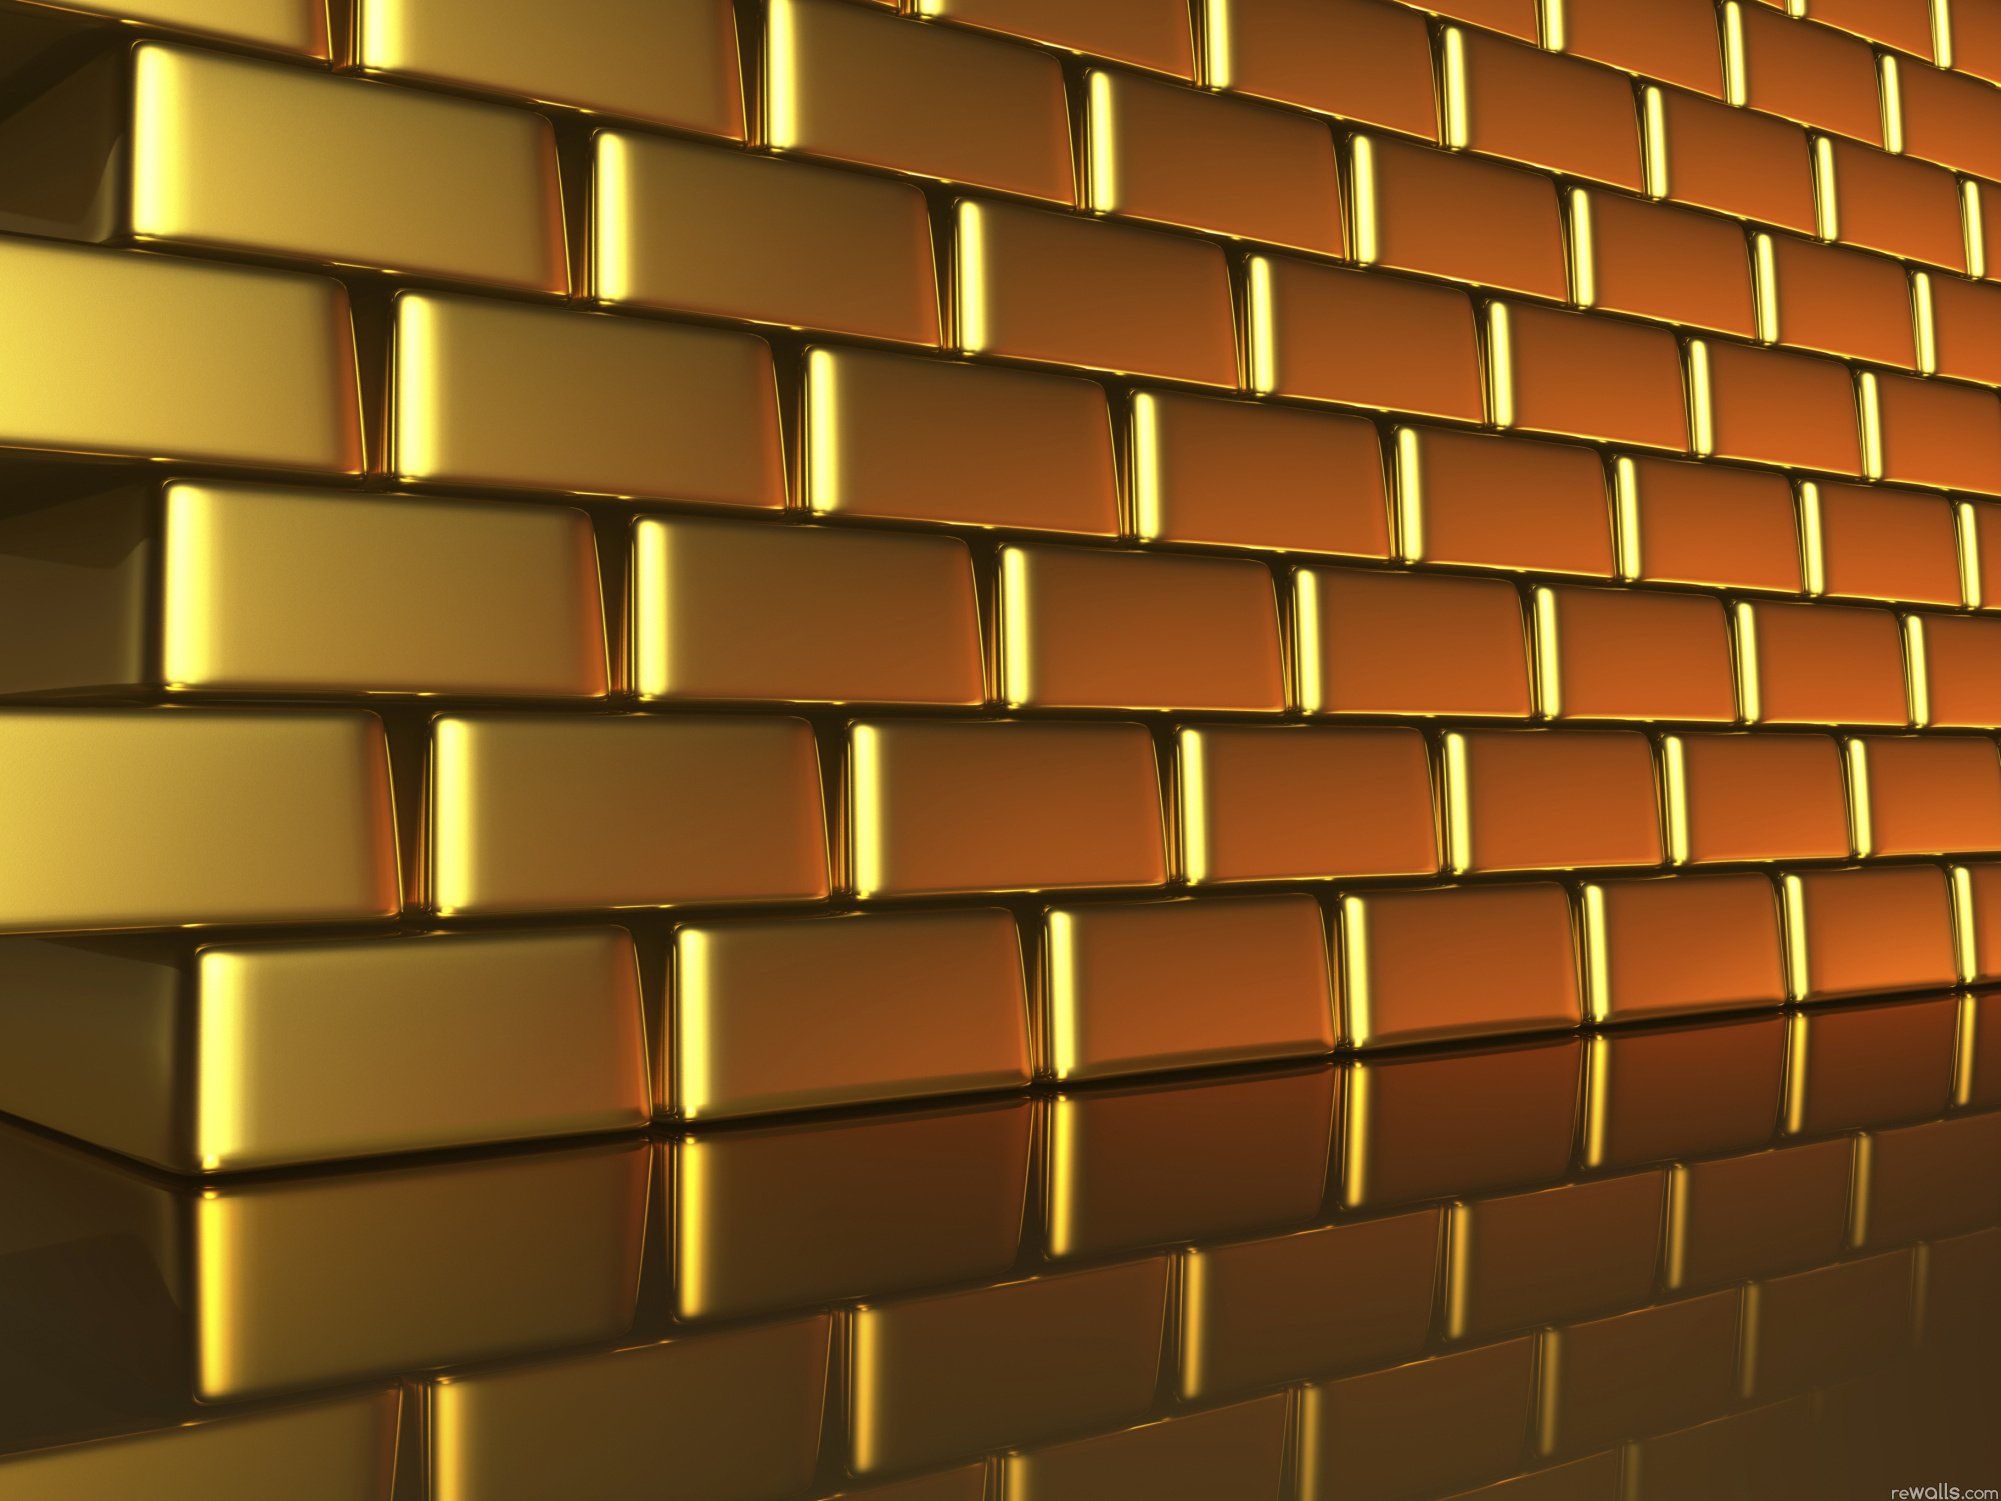 Solid Gold Backgrounds